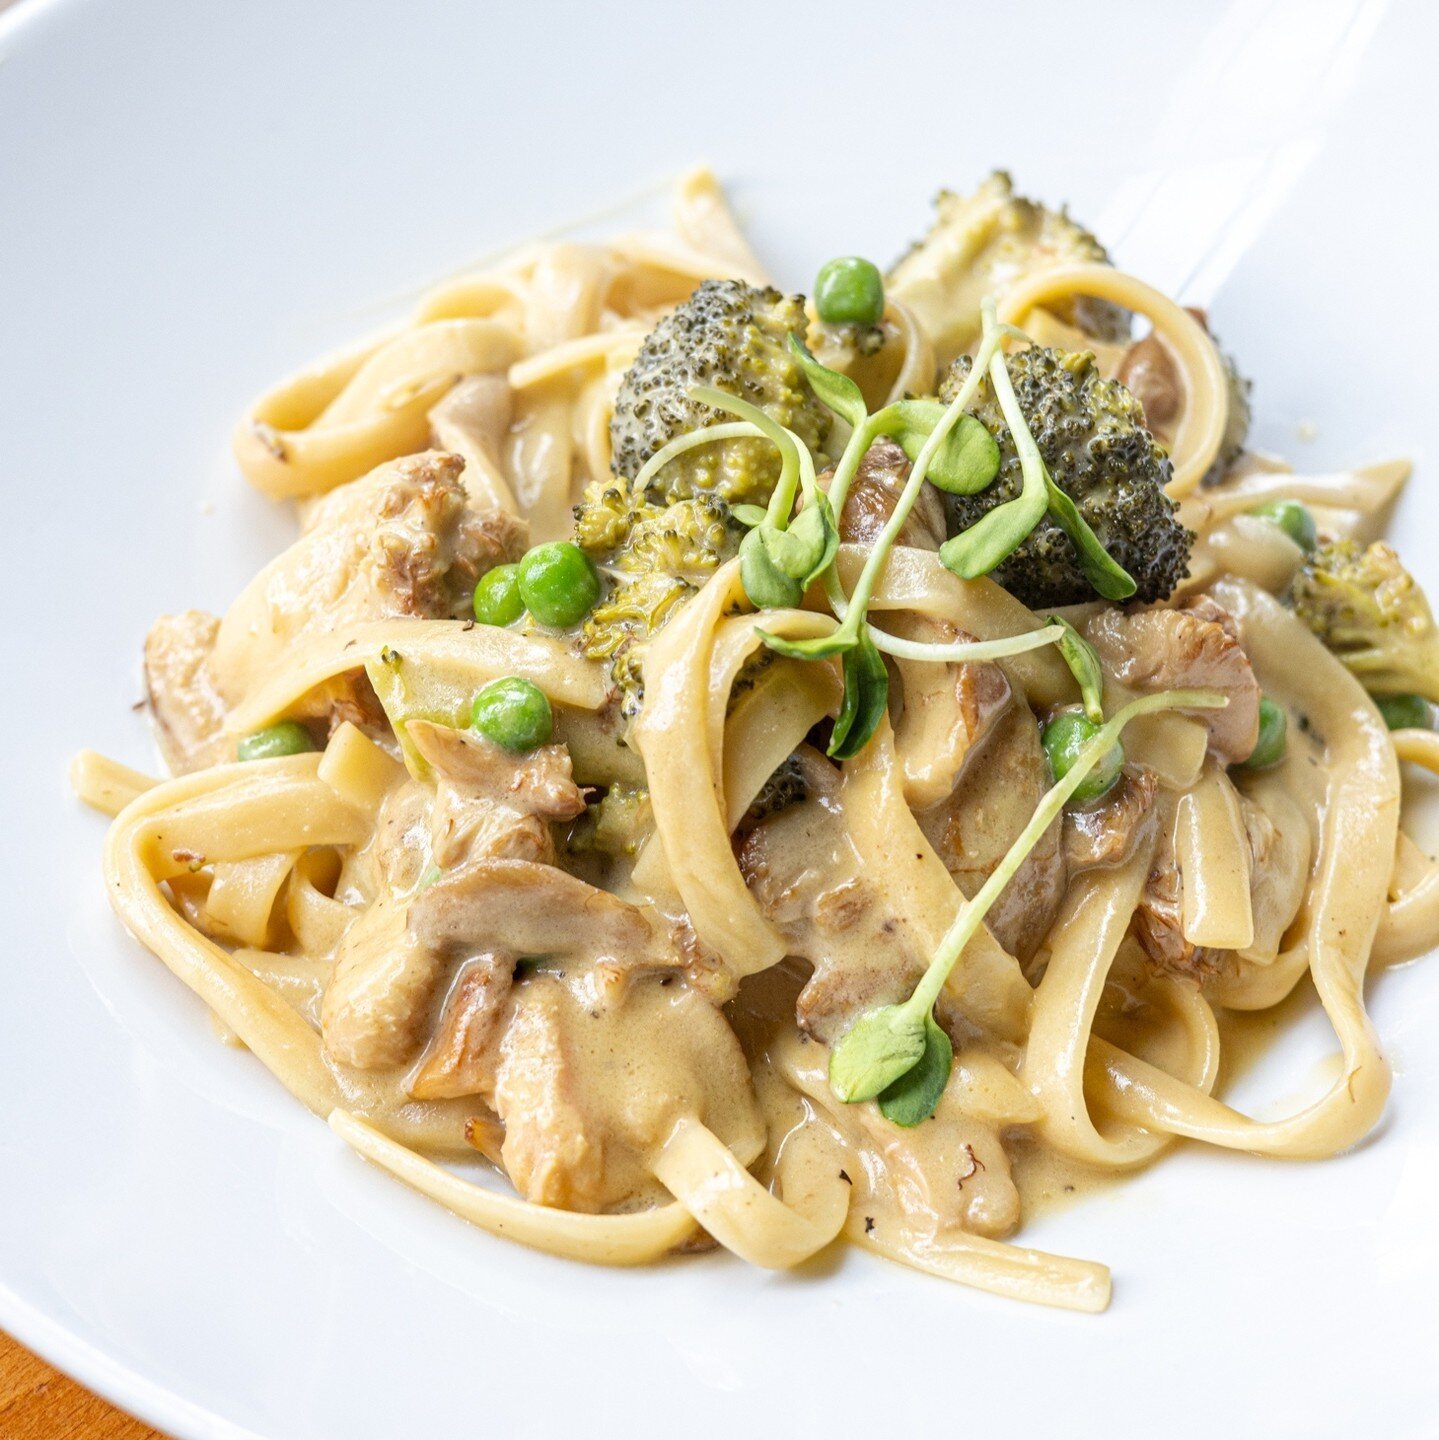 We really love our mushrooms around here! 🍄⁠
⁠
Simple, delectable &amp; vegan Local Mushroom Fettuccine. The stars of the show are local Oyster Mushrooms that are tossed with Green Peas, Summer Squash, in a Truffle-Cashew Cream Sauce.⁠ ⁠
⁠
Click the